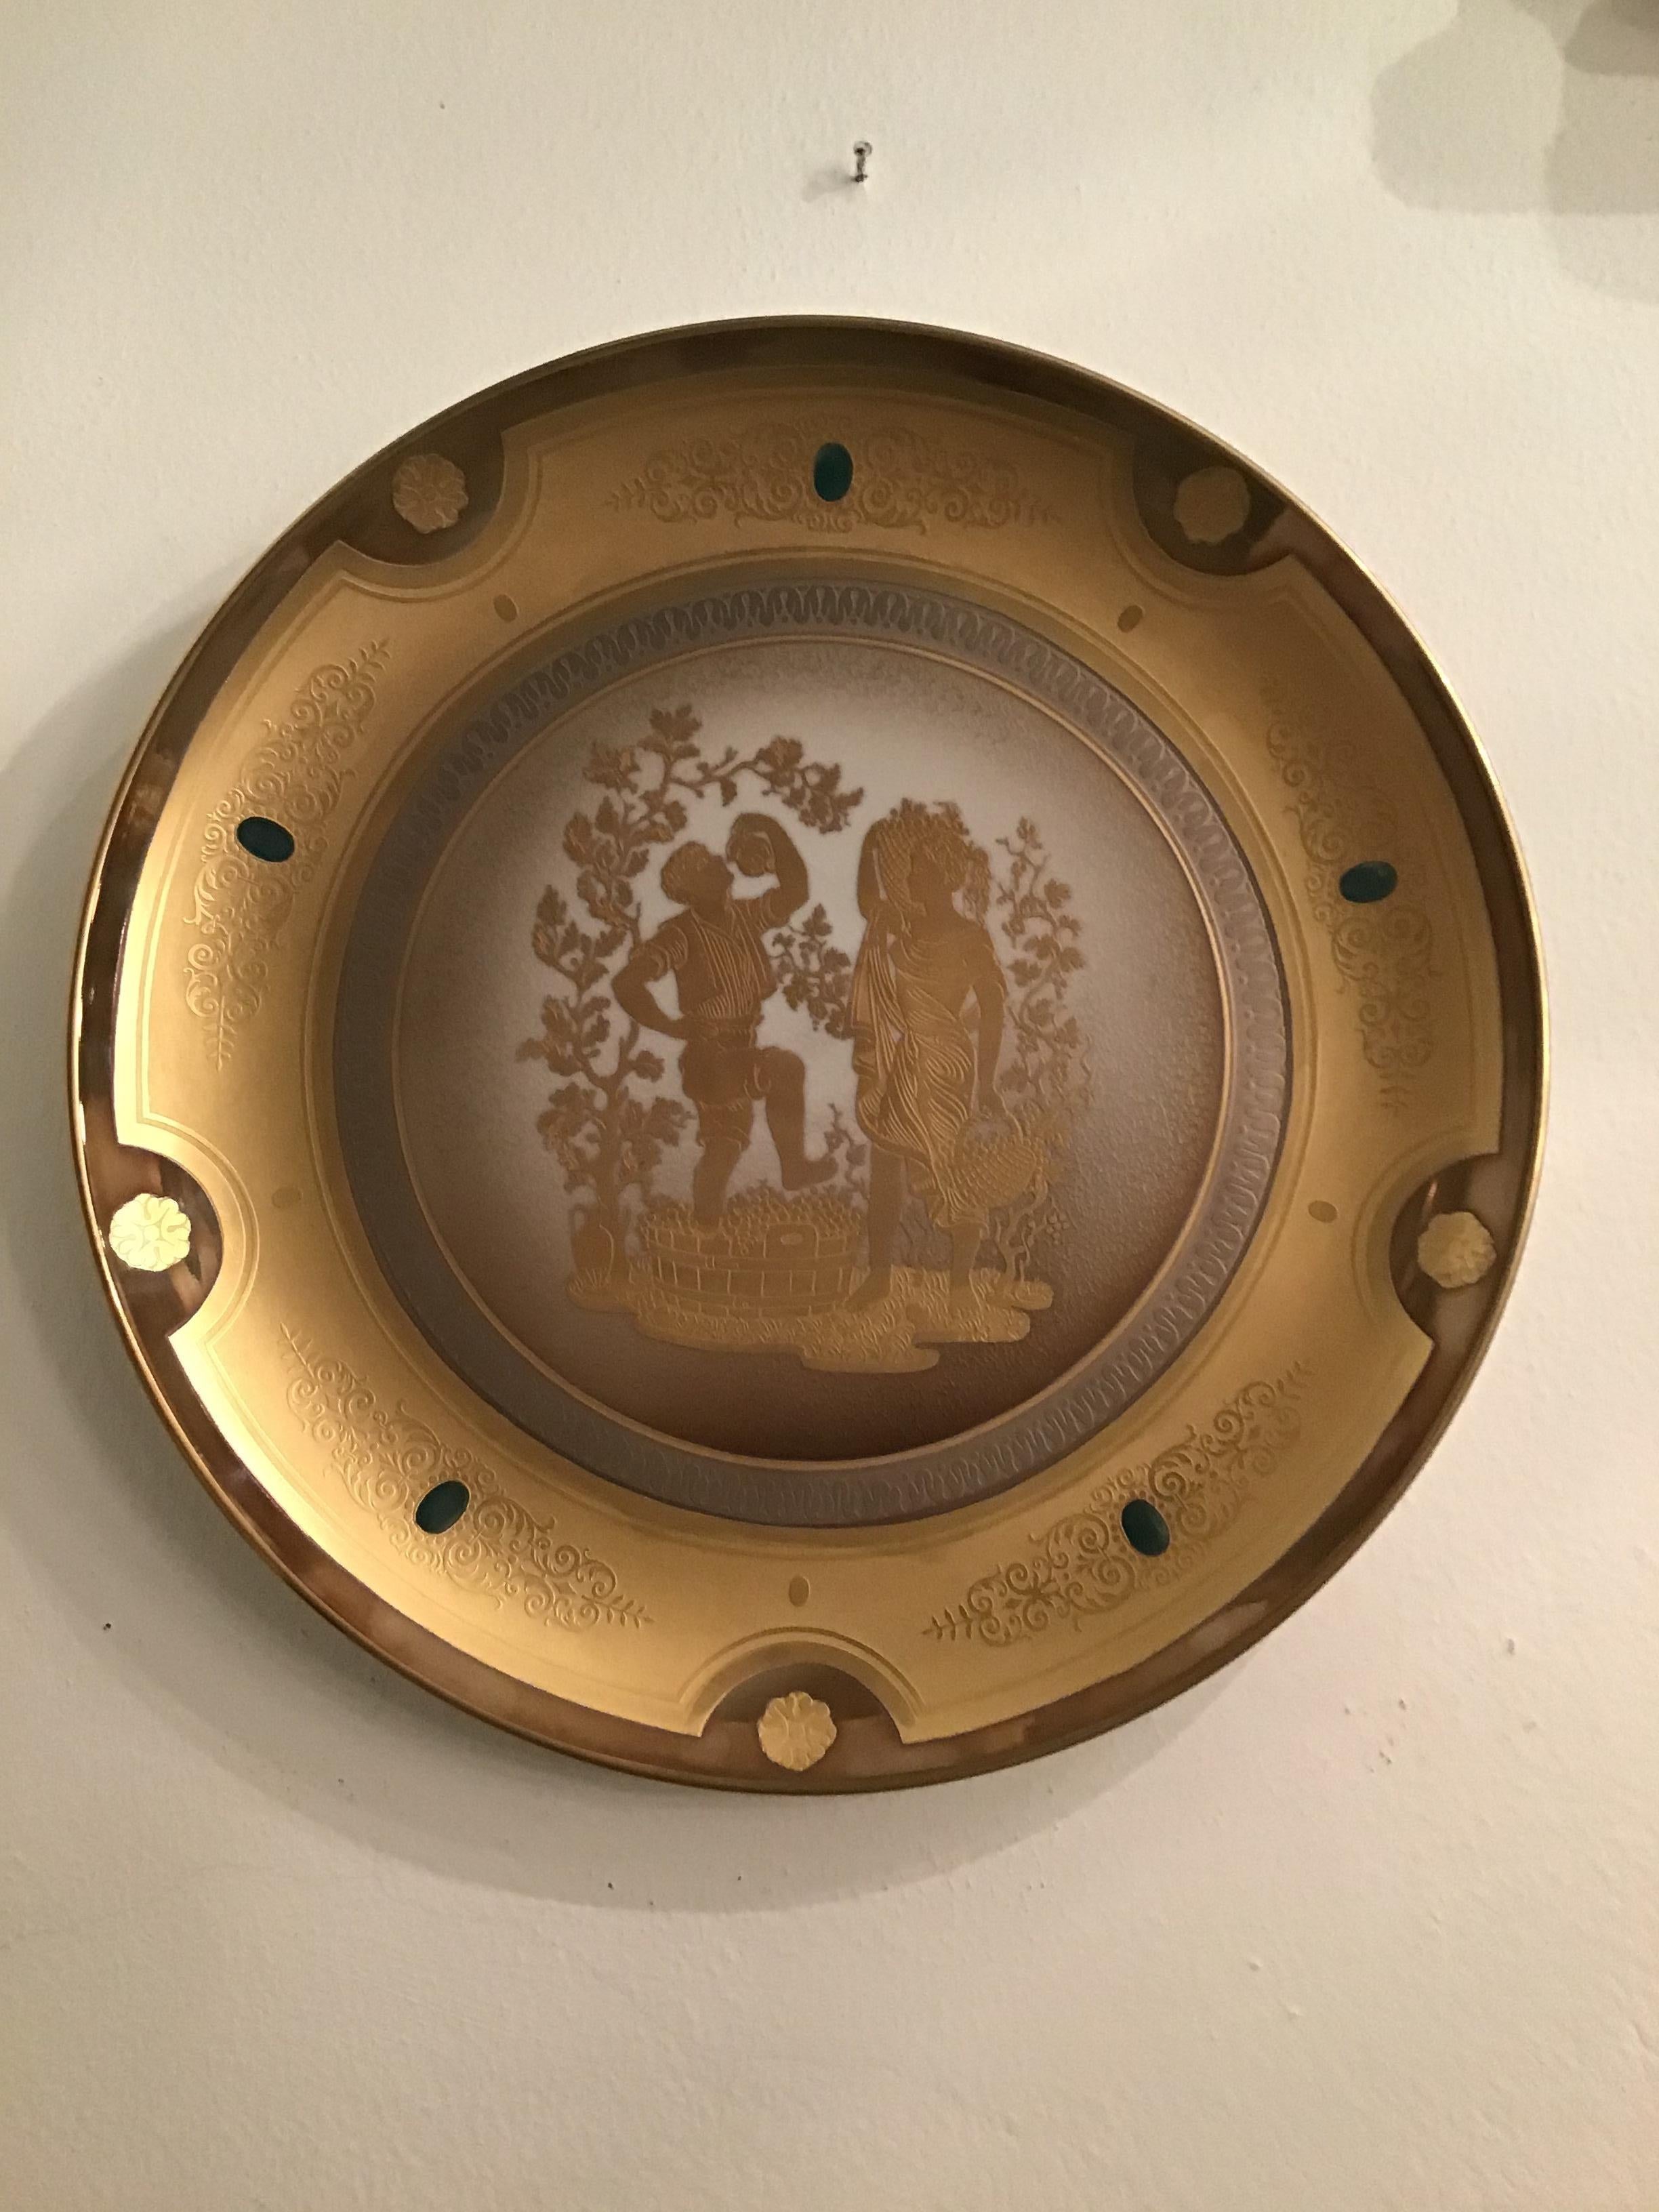 Morbelli Porcelain Wall Plate Gold “ Autunno”, 1960, Italy For Sale 5